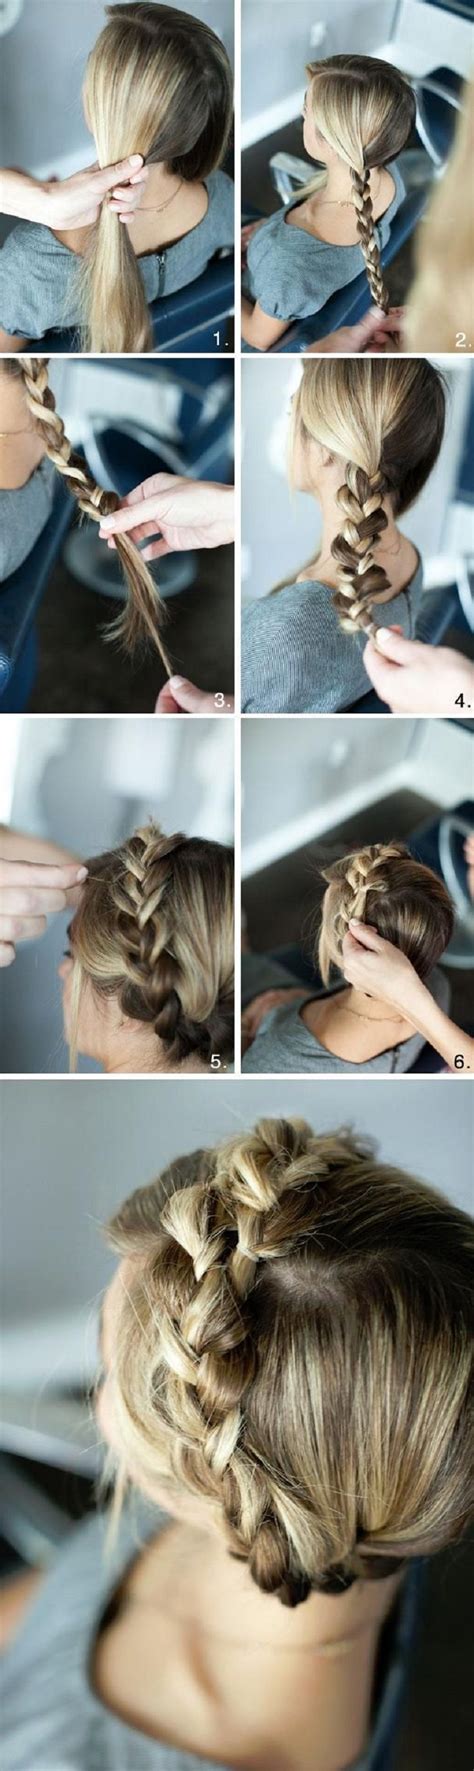 Easily move forward or backward to get to the perfect spot. 10 easy braid hairstyles to do yourself | Nail Art Styling